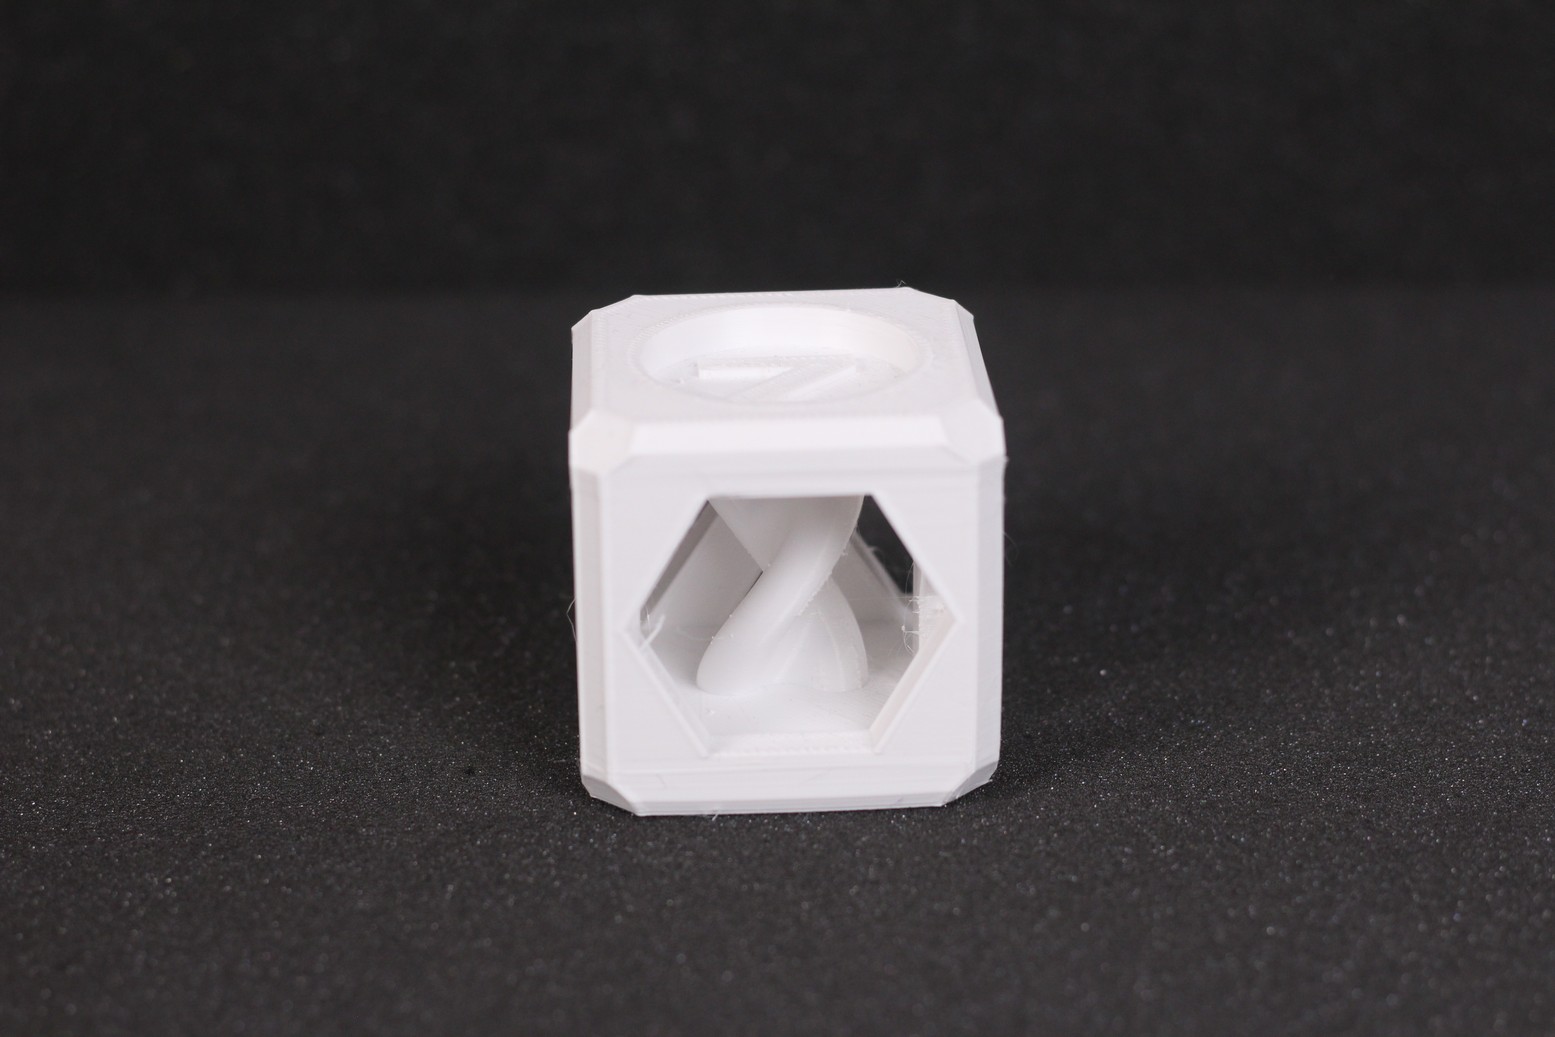 200 Helix Test Cube printed in PETG 2 | Creality Ender 2 Pro Review: Is it worth it?